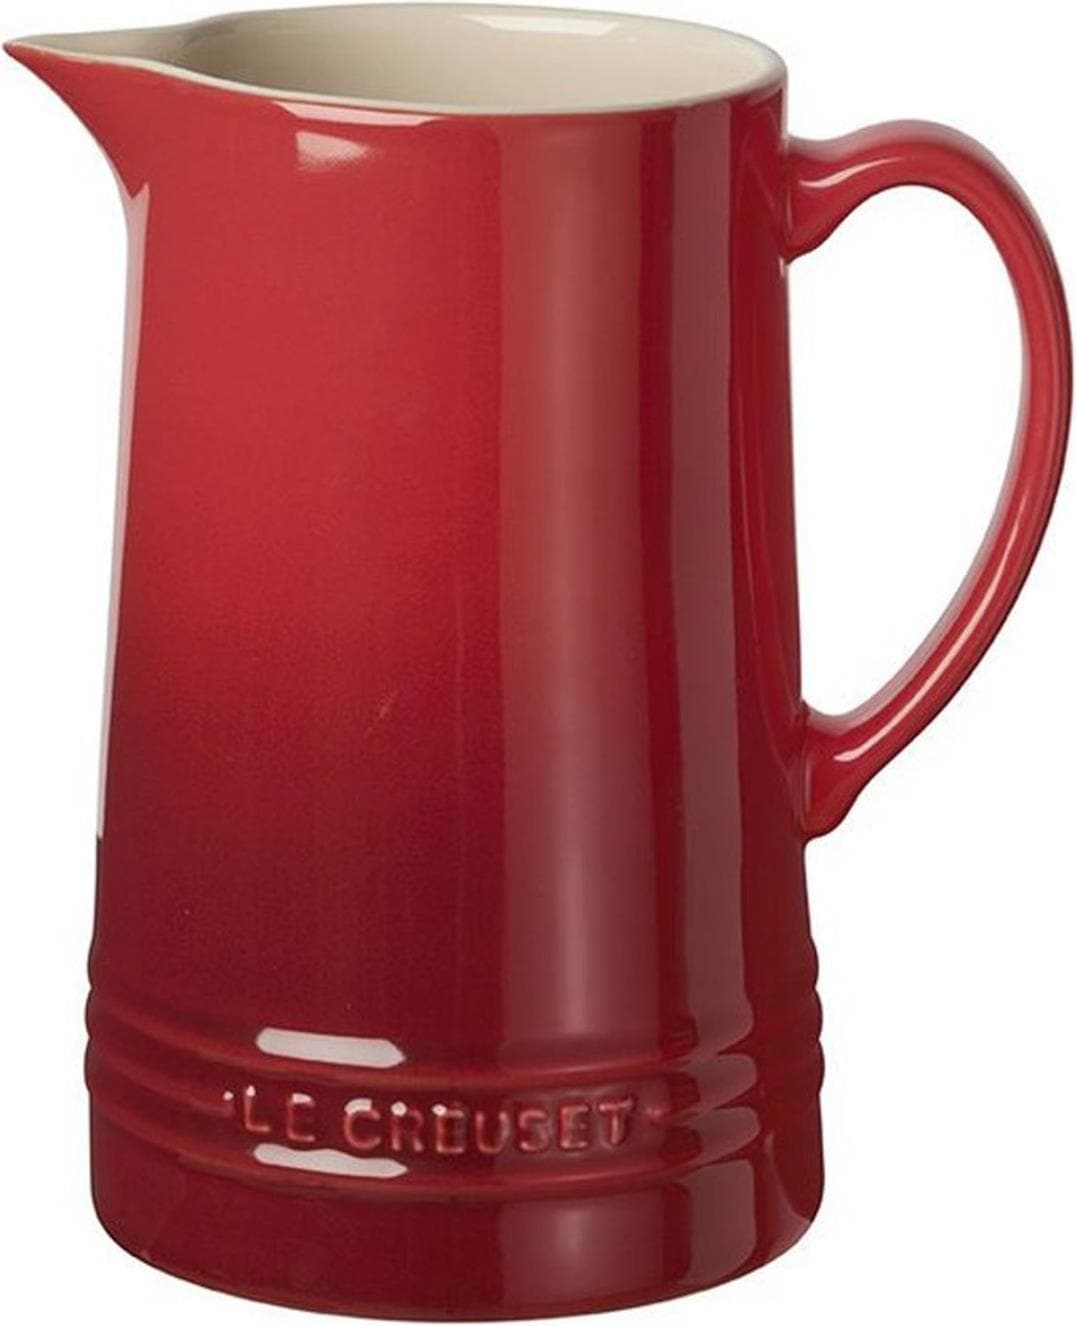 le creuset rot